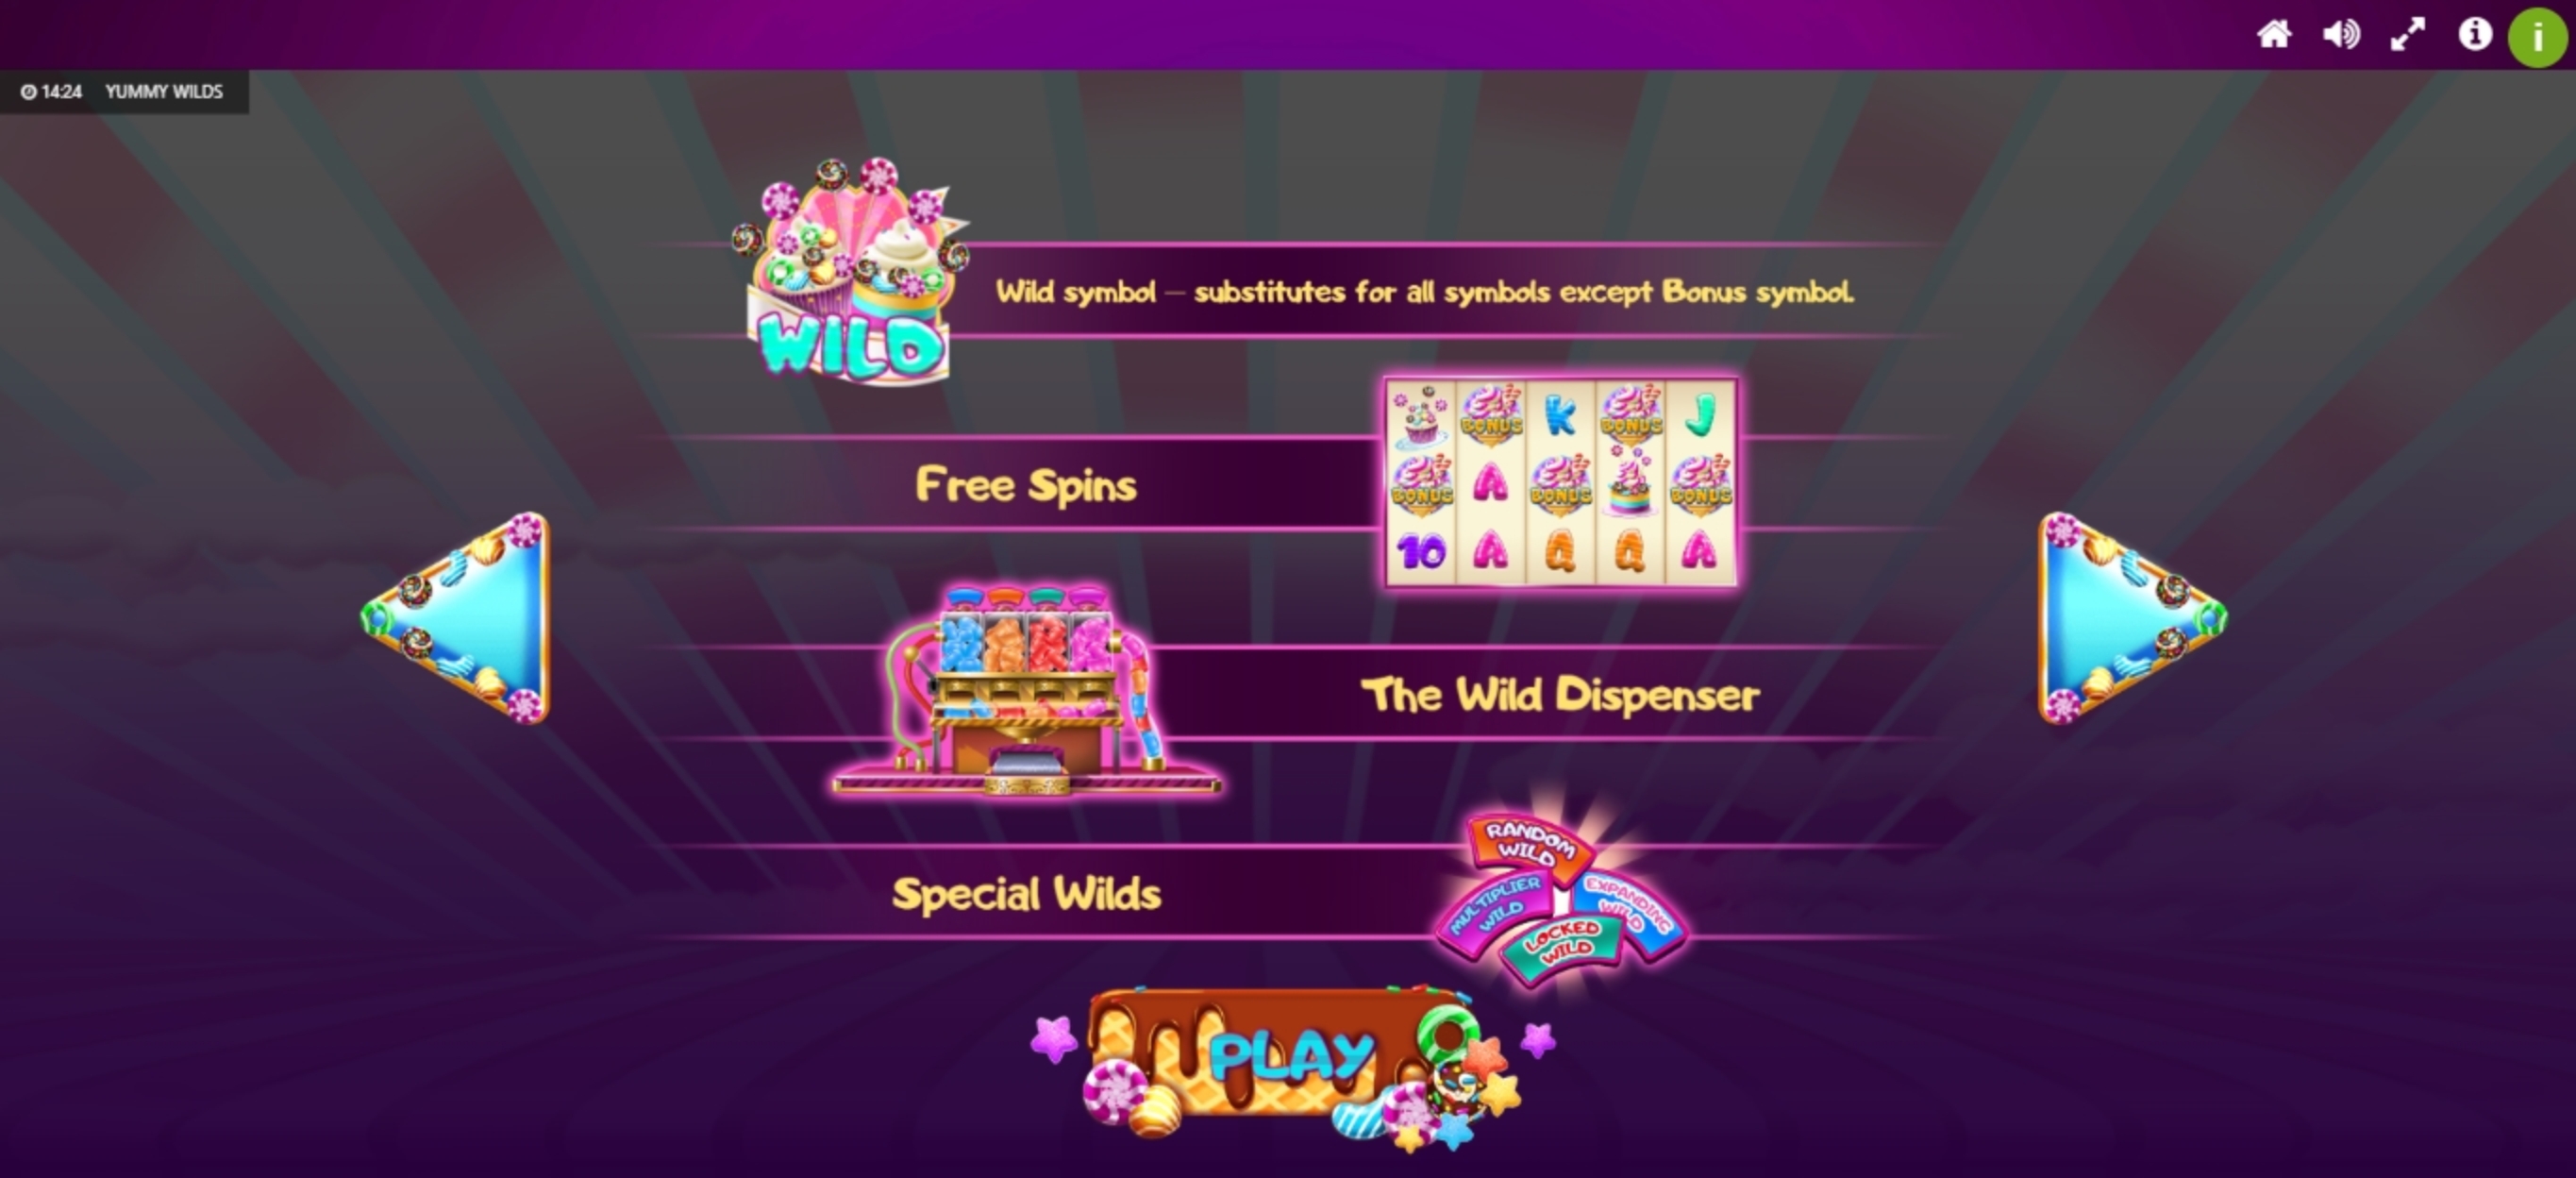 Play Yummy Wilds Free Casino Slot Game by Max Win Gaming